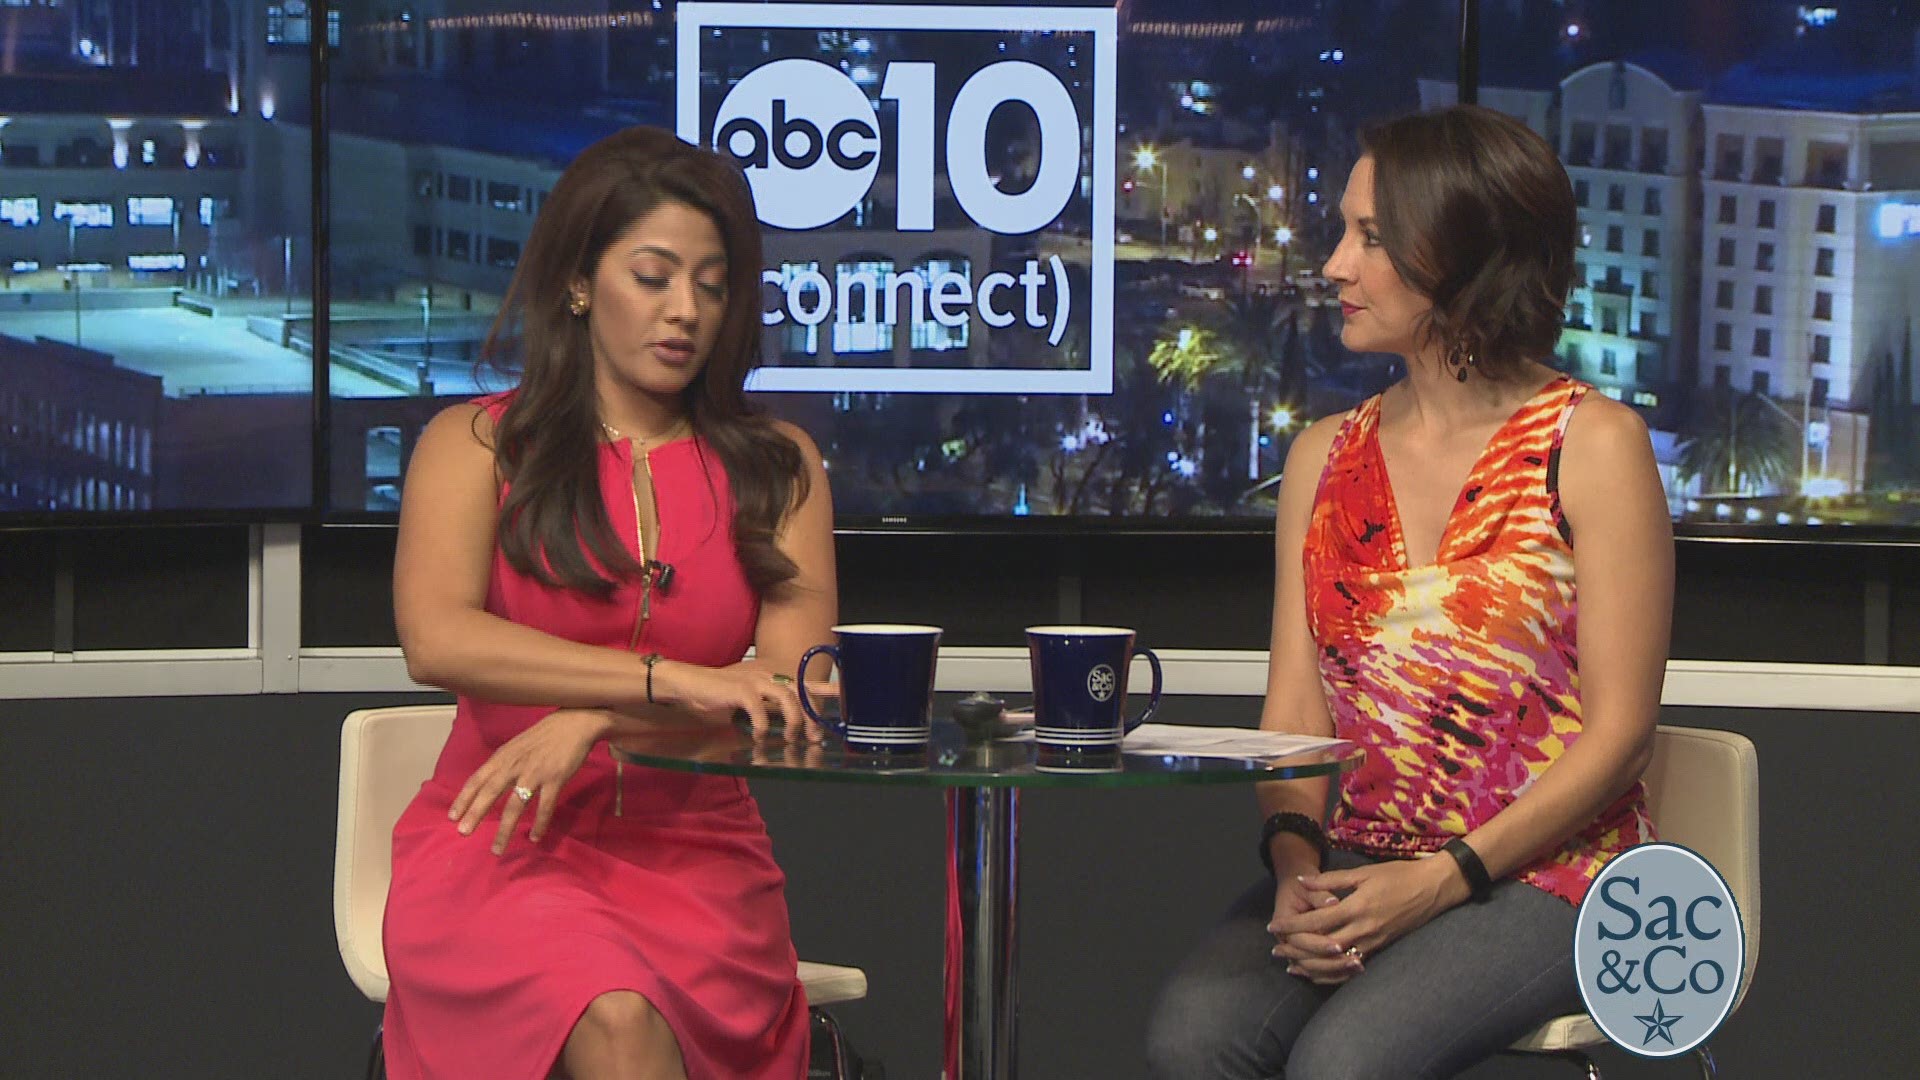 See what Sac&Co Host, Mellisa Paul and ABC10's Megan Telles discuss in news today.